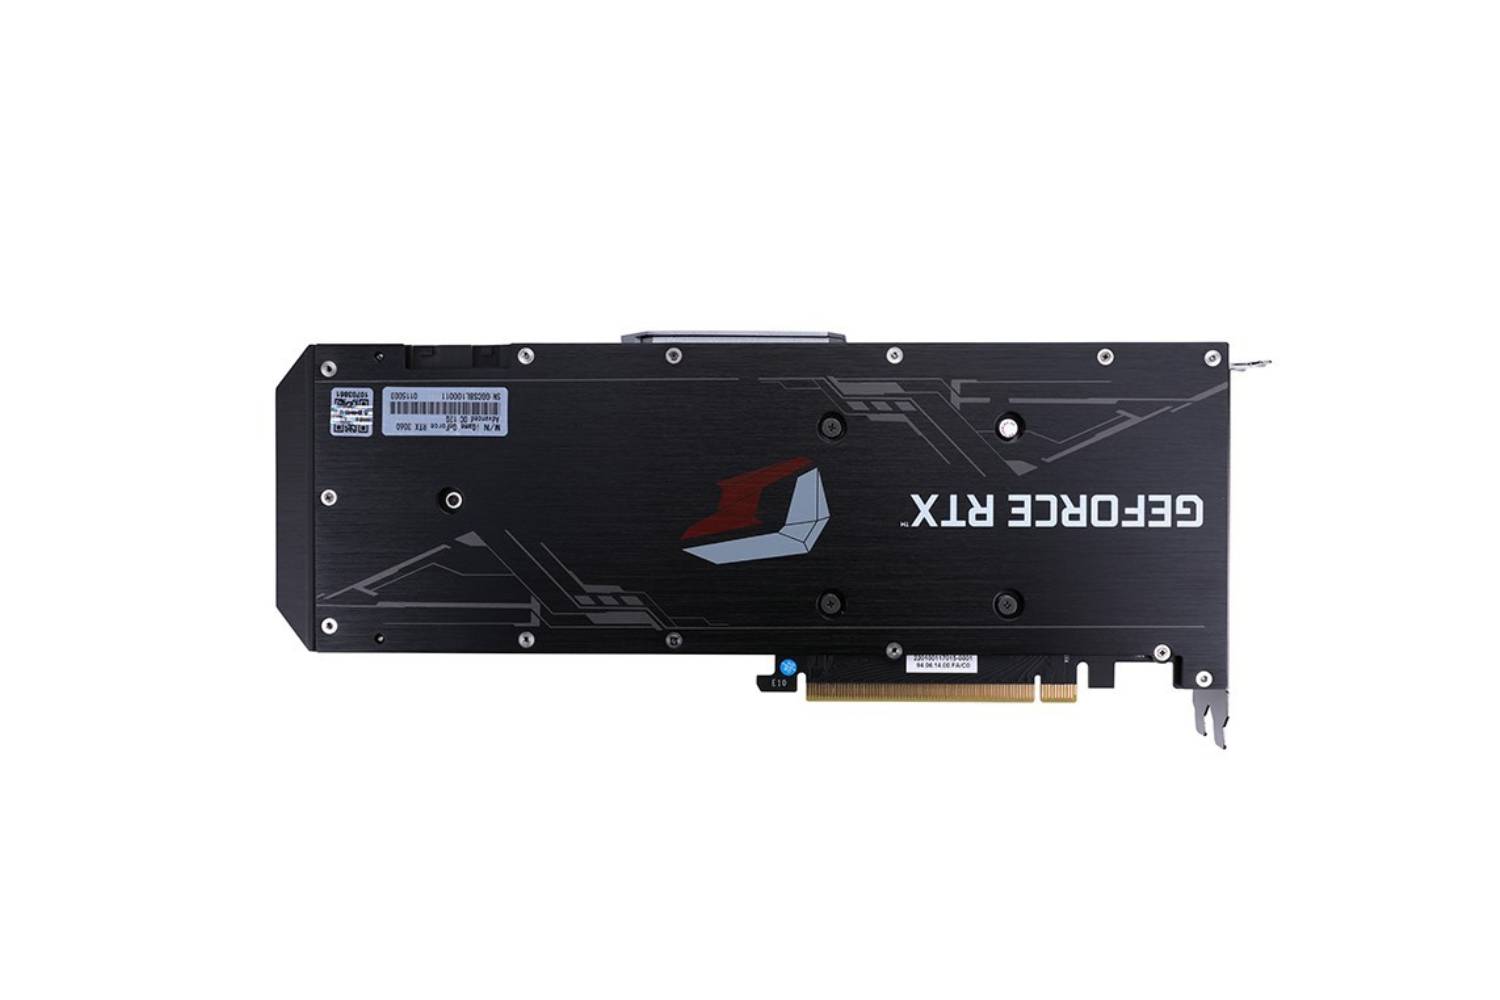 Colorful iGame GeForce RTX 3060 Advanced OC 12G L-V Graphics Card